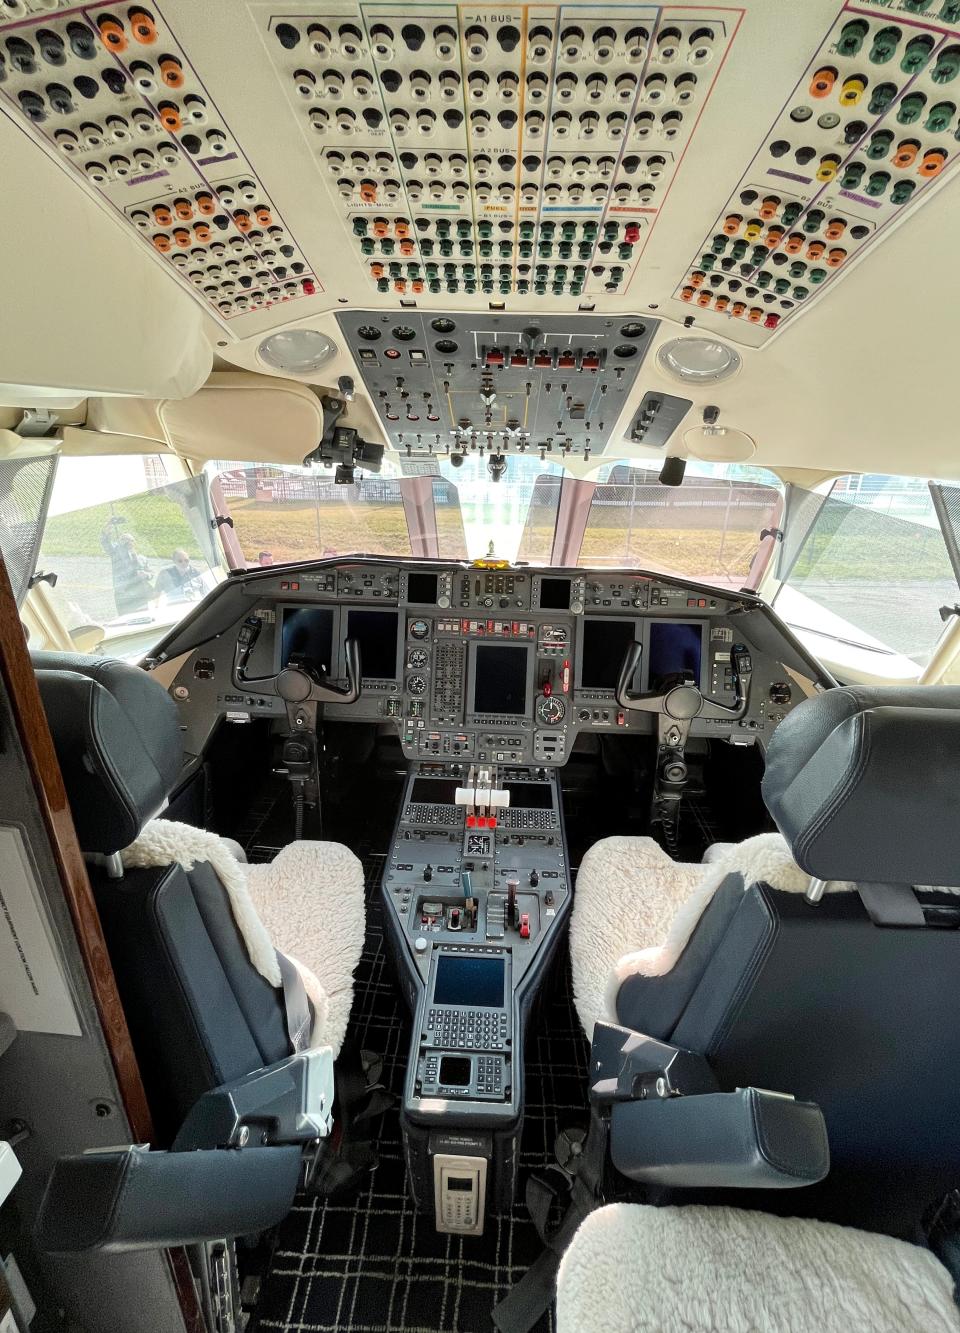 Dassault Falcon Jet officials offered tours of a 1998 Falcon 900EX business jet to attendees of Wednesday's groundbreaking ceremony at Melbourne Orlando International Airport.